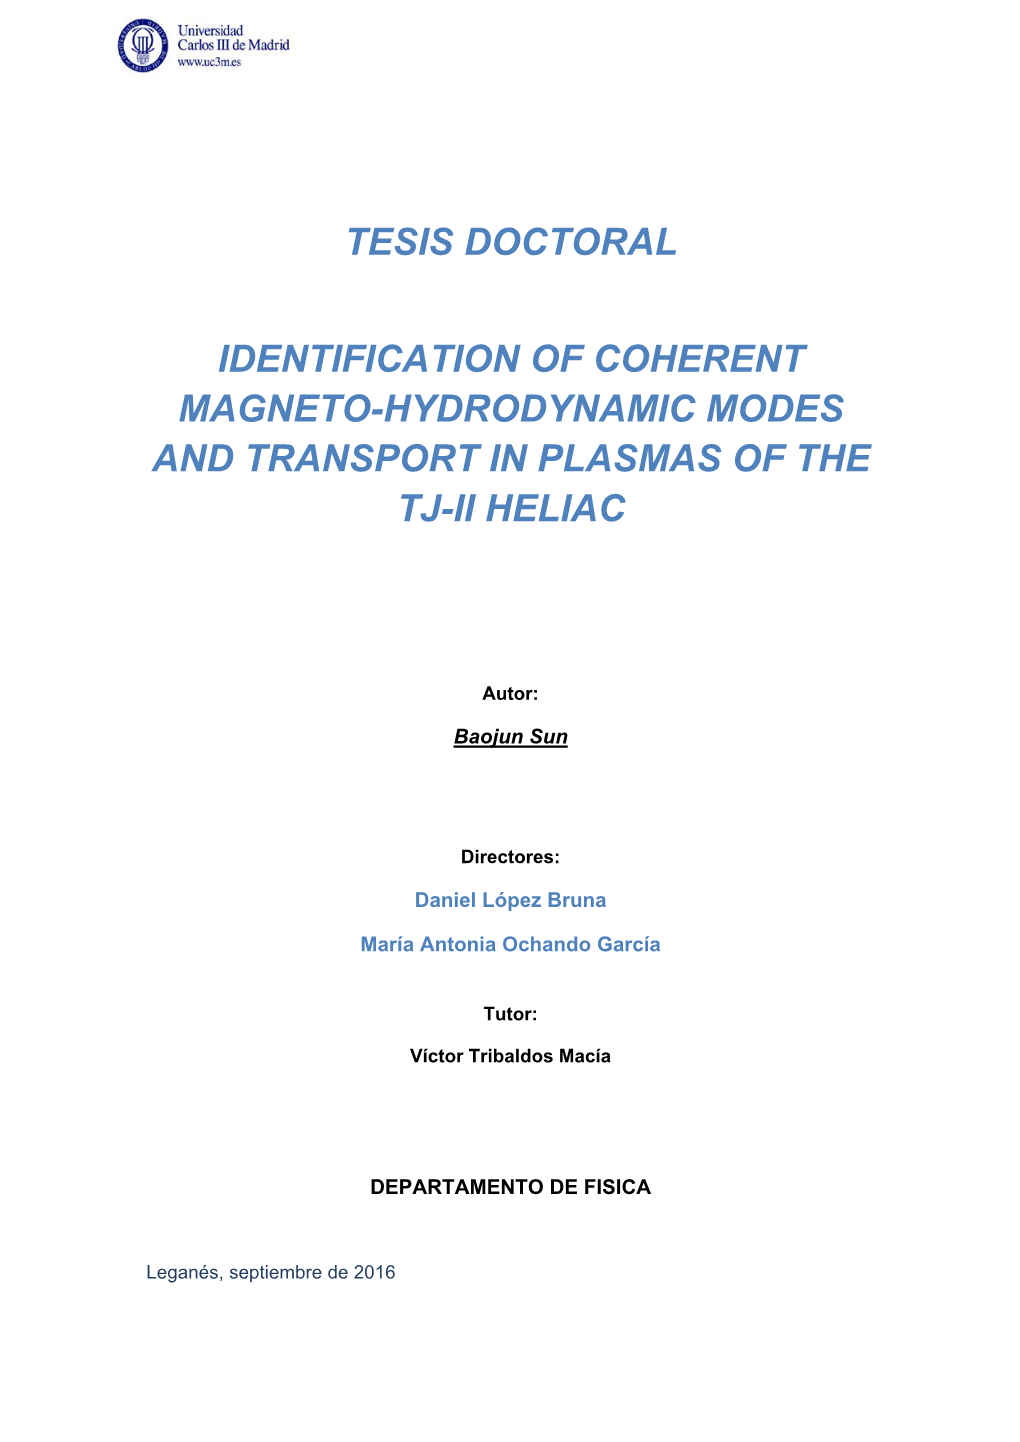 Identification of Coherent Magneto-Hydrodynamic Modes and Transport in Plasmas of the Tj-Ii Heliac